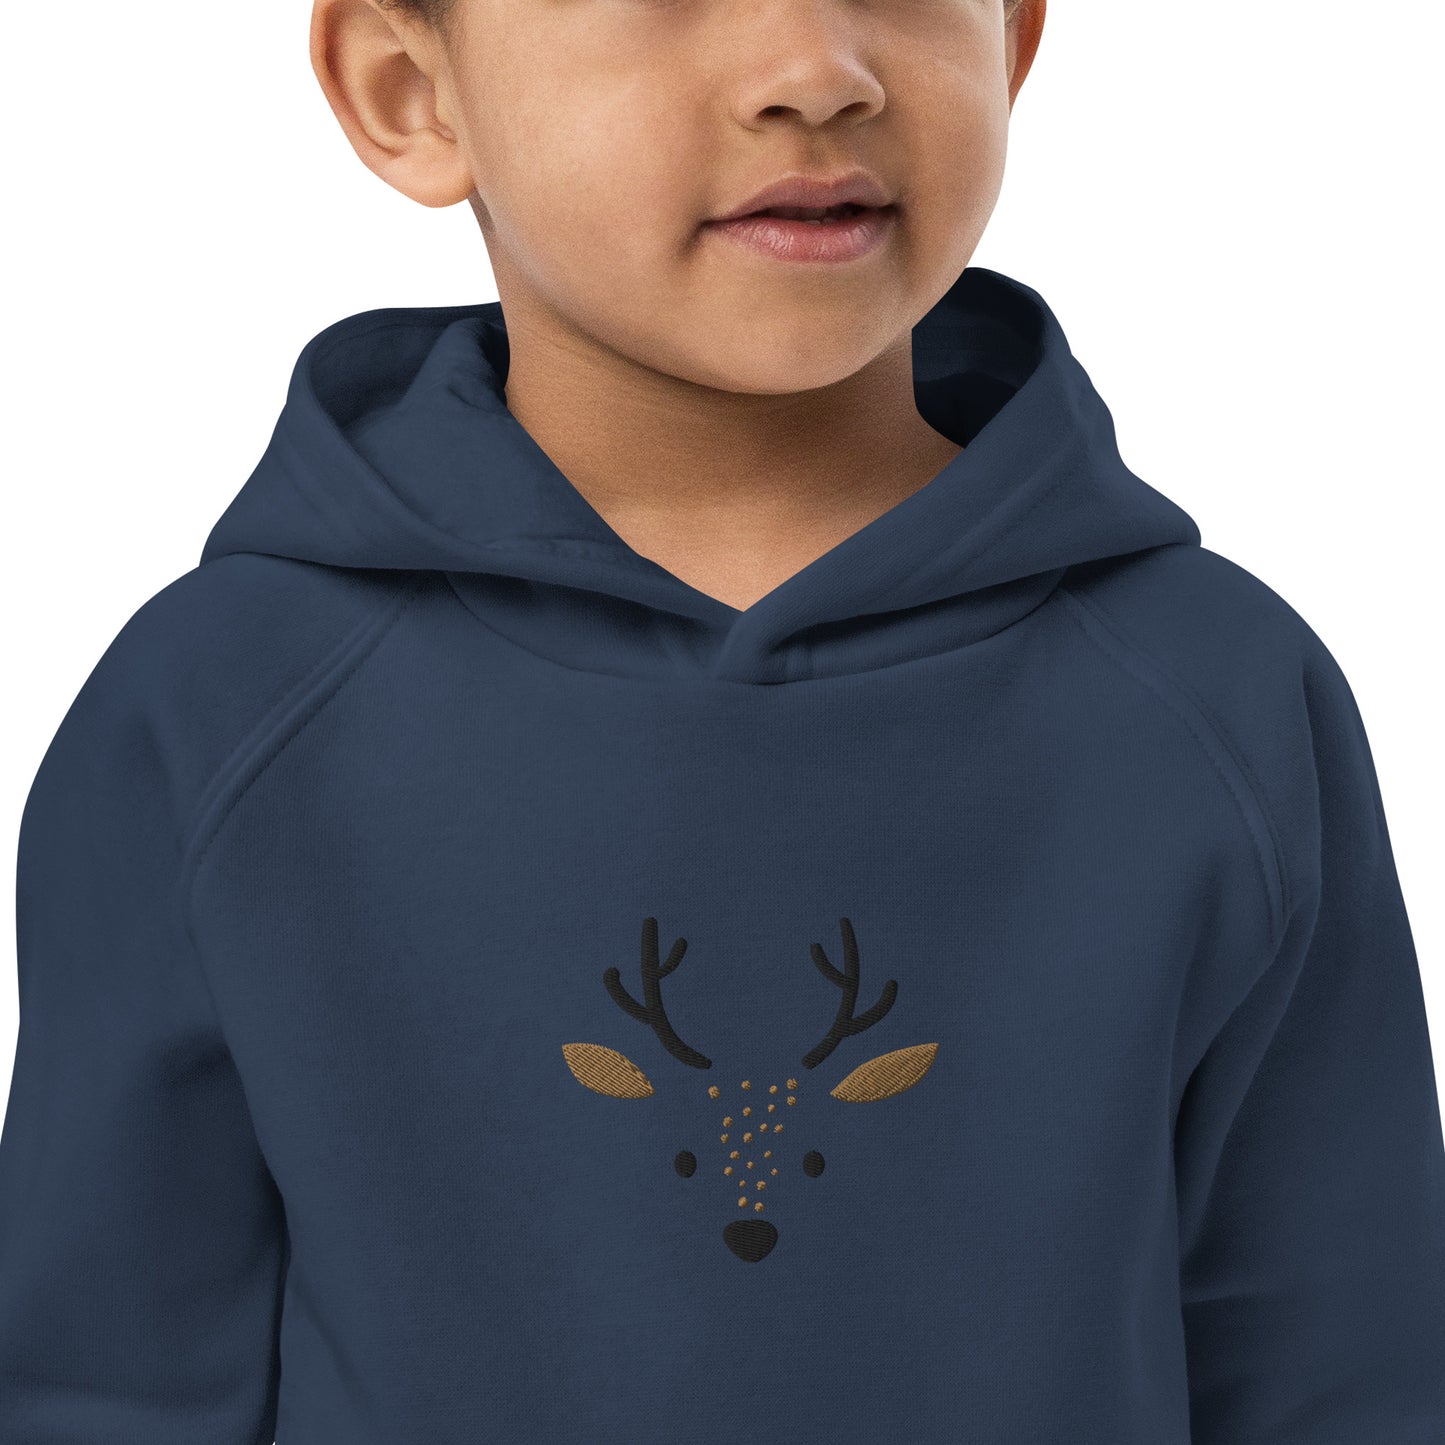 Deer 1 Kids Eco Hoodie with cute animals, Organic Cotton pullover for children, gift idea for kids, soft hoodie for kids for Christmas